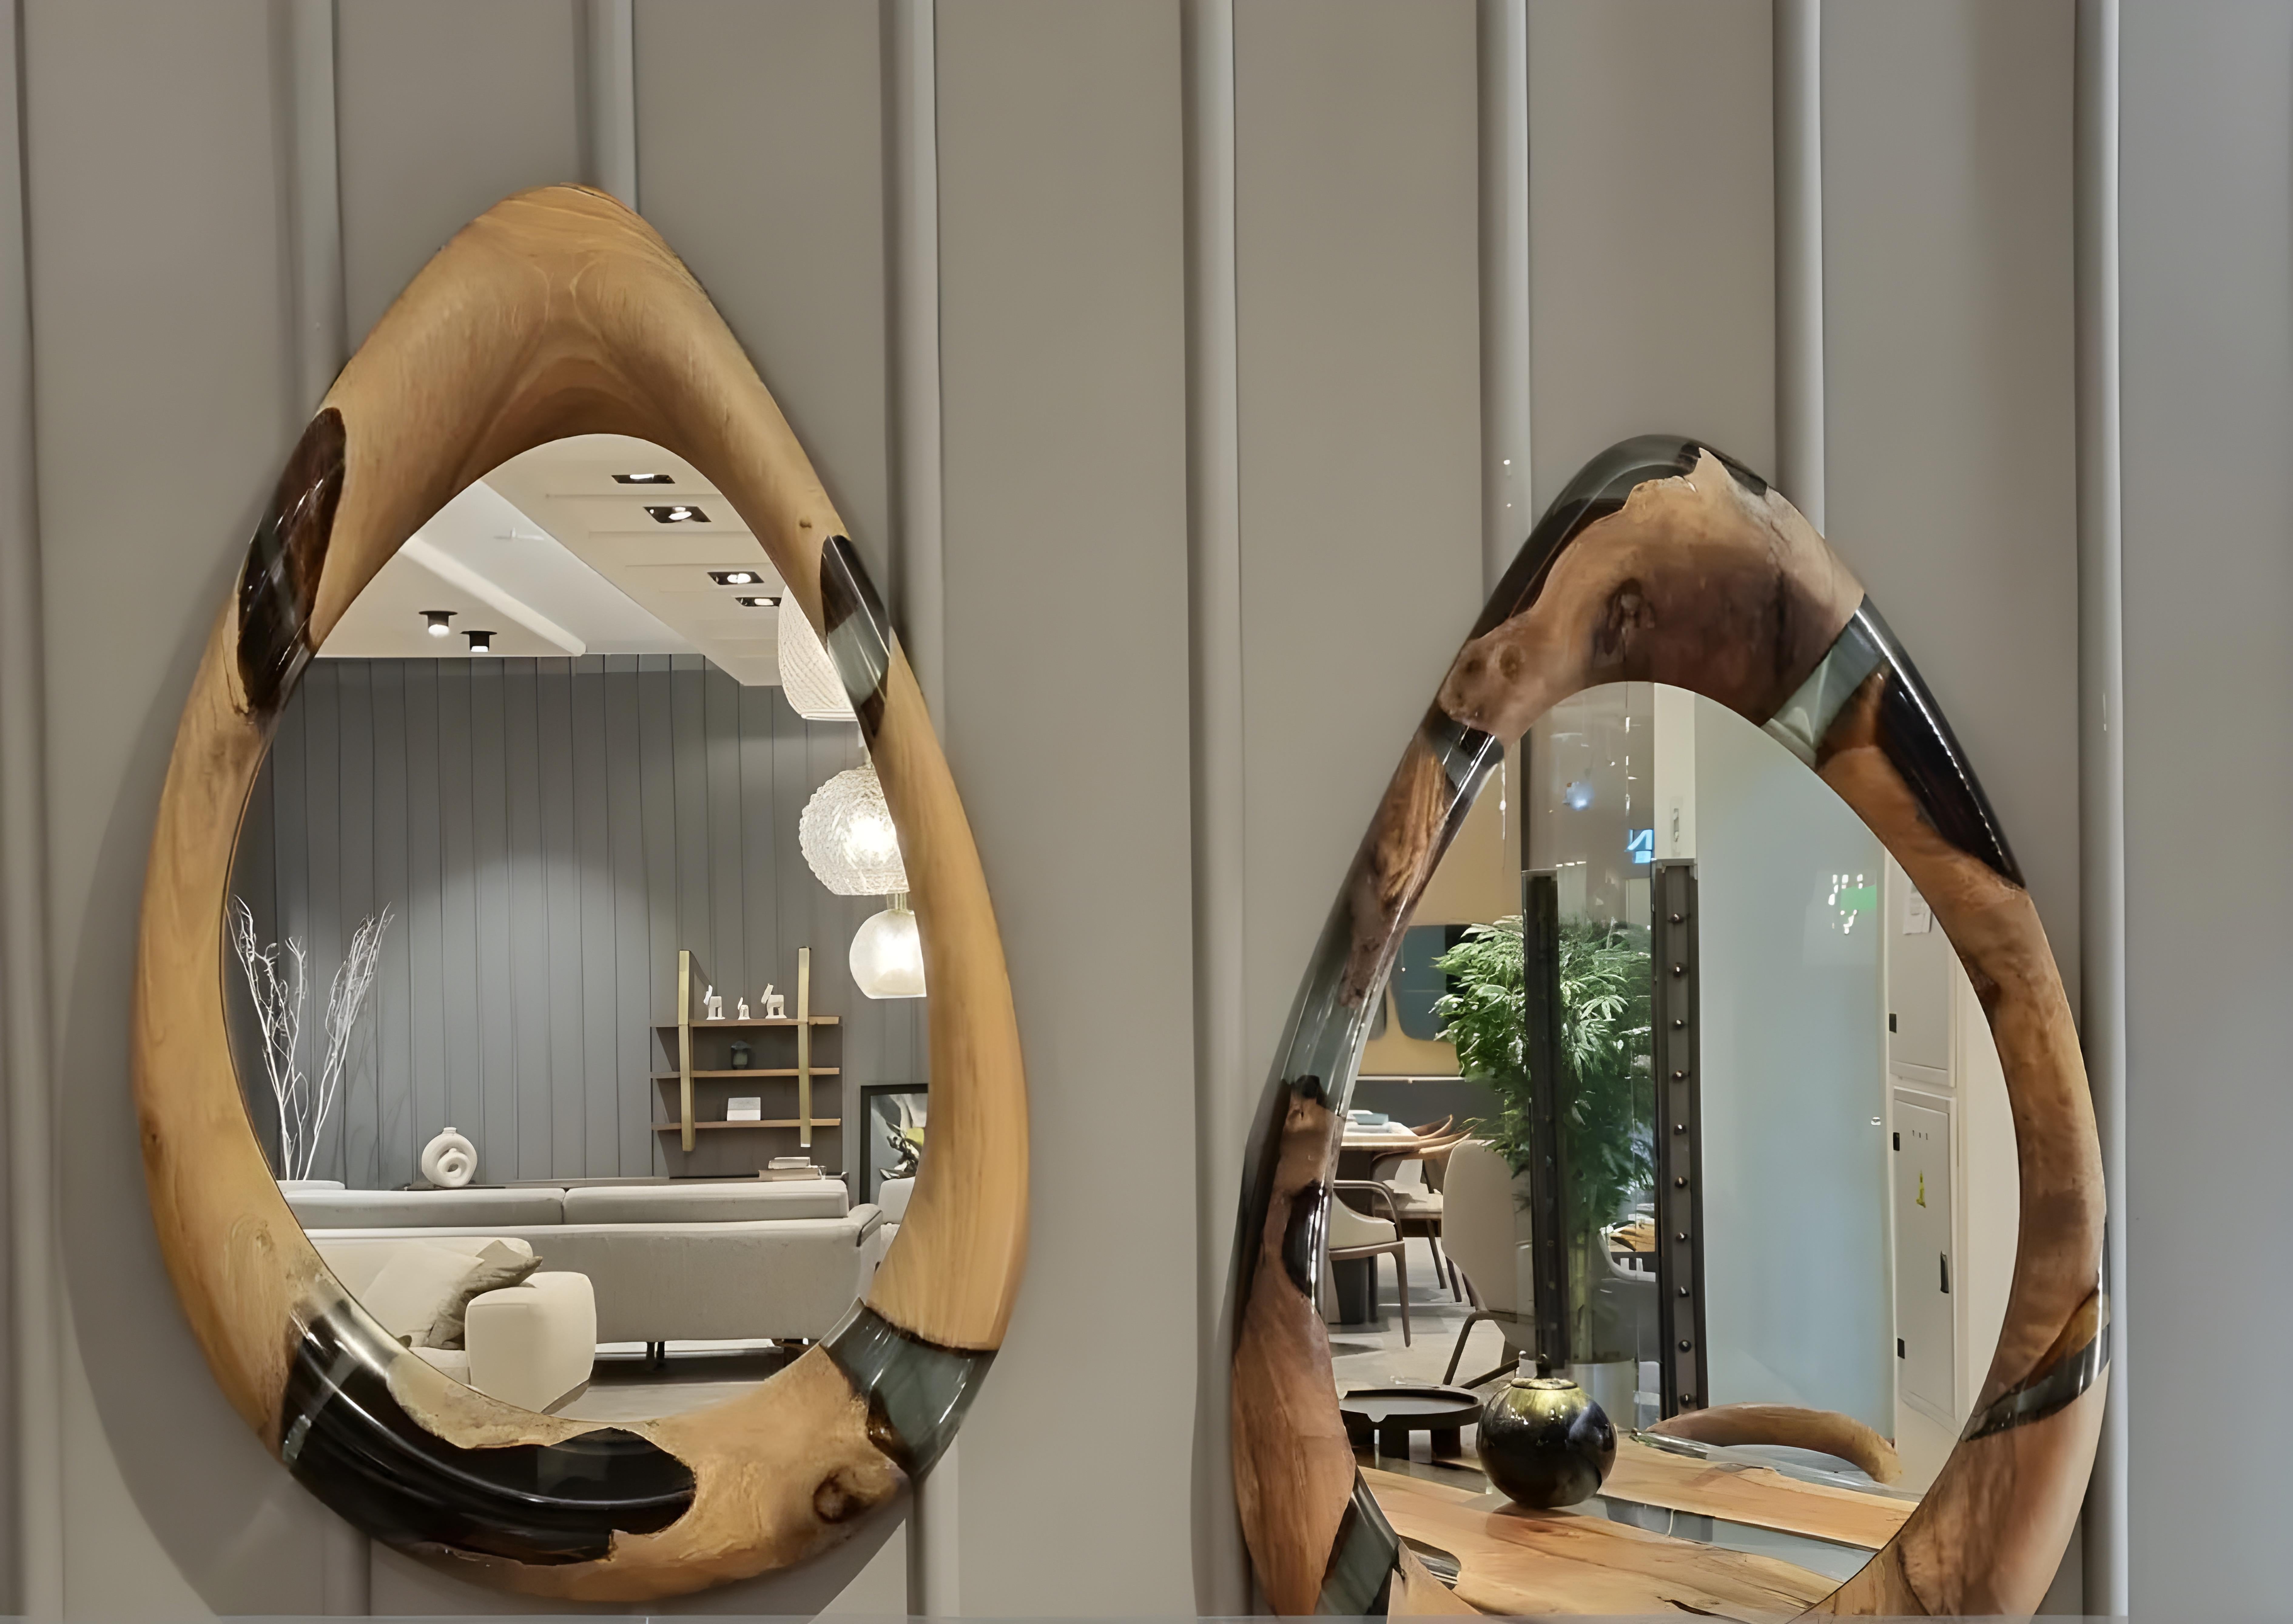 This mirror is not just a mere functional accessory, it's a work of art that adds elegance to any room. It is handmade with care and precision, using a unique combination of materials that creates a stunning visual effect. 

The rich, warm tones of